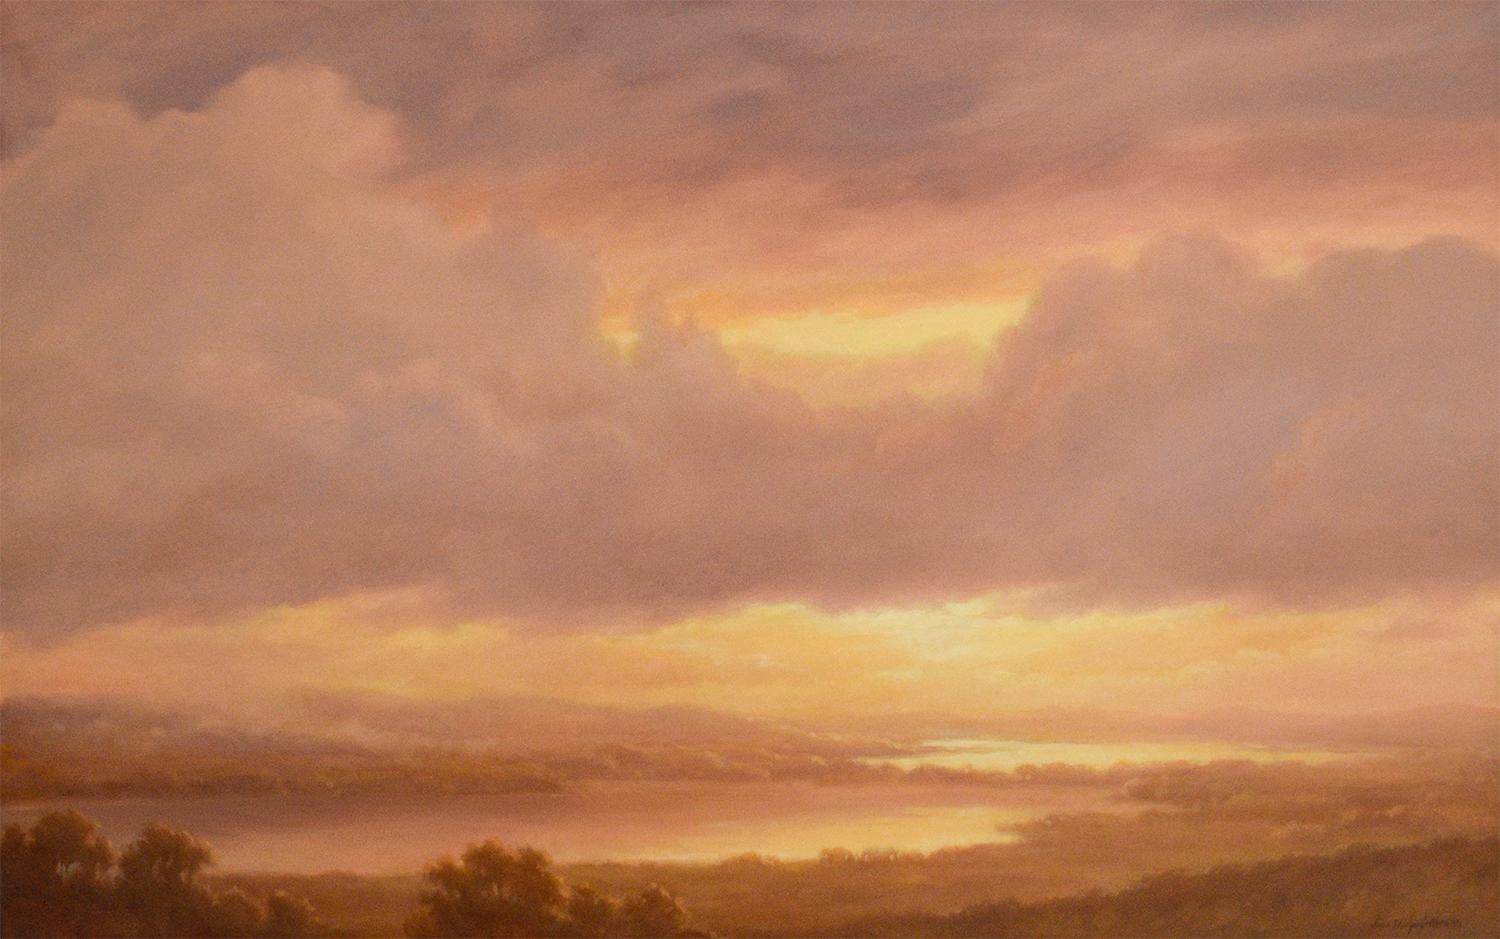 Academic style, Hudson River School landscape painting of a orange and yellow sunset over the Hudson River and Catskill Mountains
"The Valley Luminous" by Jane Bloodgood-Abrams, painted in 2019
30 x 48 inches oil on canvas, 32 x 50 inches in black